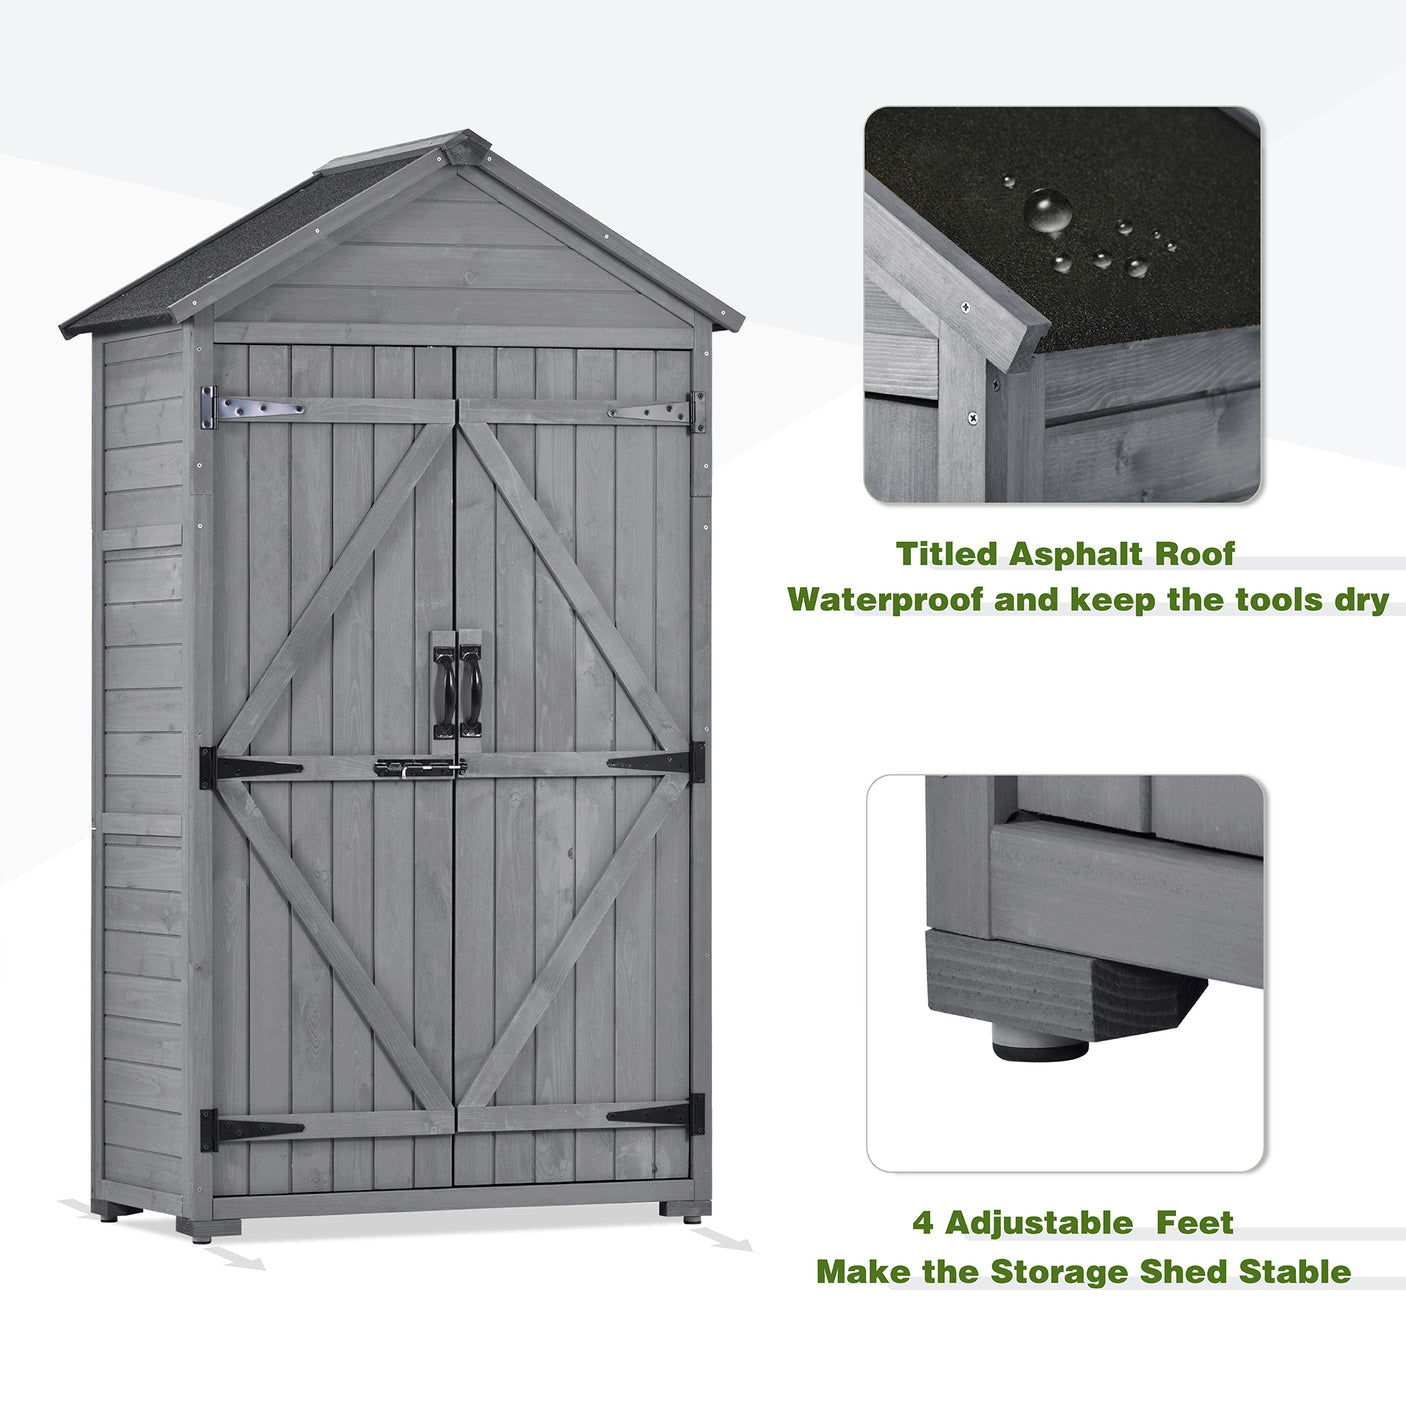 TOPMAX 5.8ft x 3ft Outdoor Wood Lean-to Storage Shed Tool Organizer with Waterproof Asphalt Roof, Lockable Doors, 3-tier Shelves for Backyard, Gray